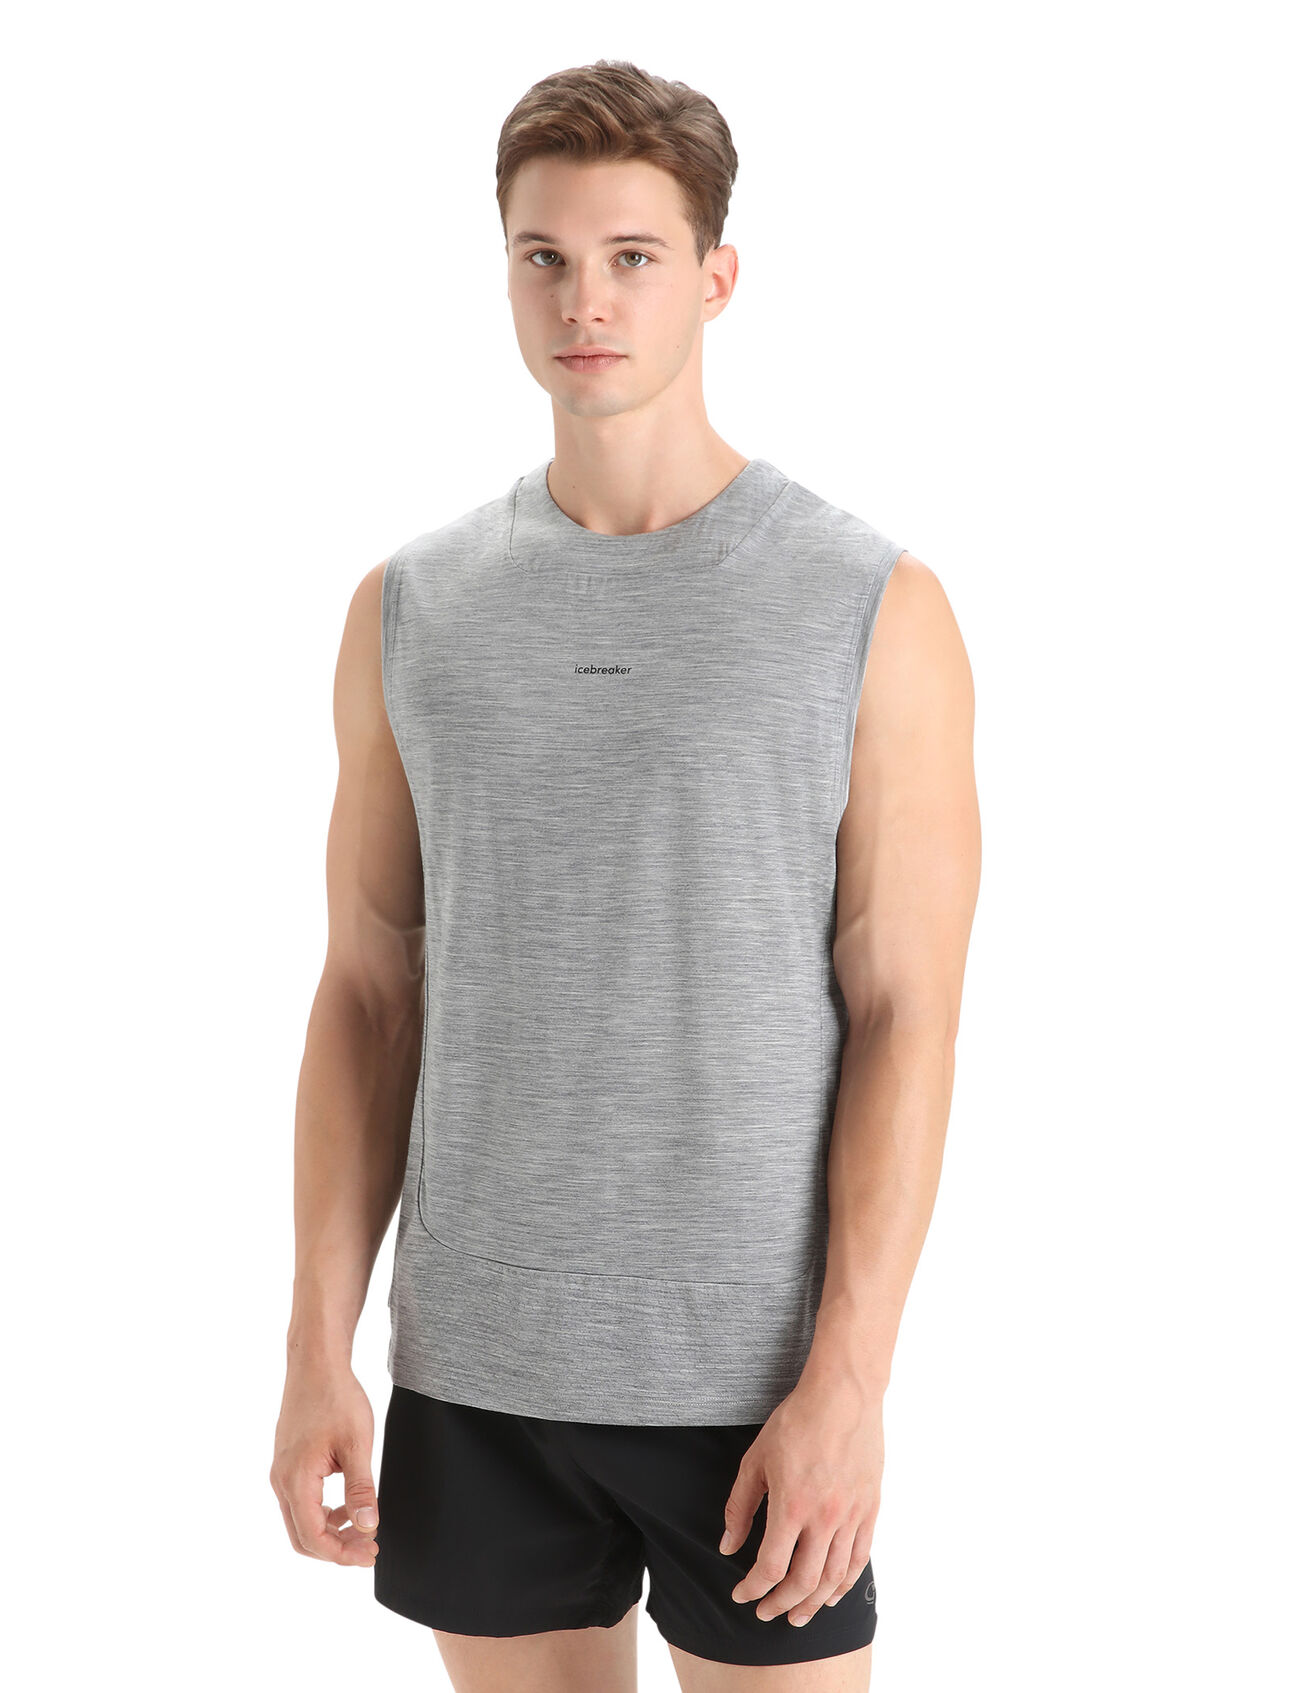 Mens ZoneKnit™ Merino Tank Our most breathable and lightweight tank designed for high-output adventures, the ZoneKnit™ Tank combines our Cool-Lite™ merino jersey fabric with eyelet mesh panels for exceptional breathability.